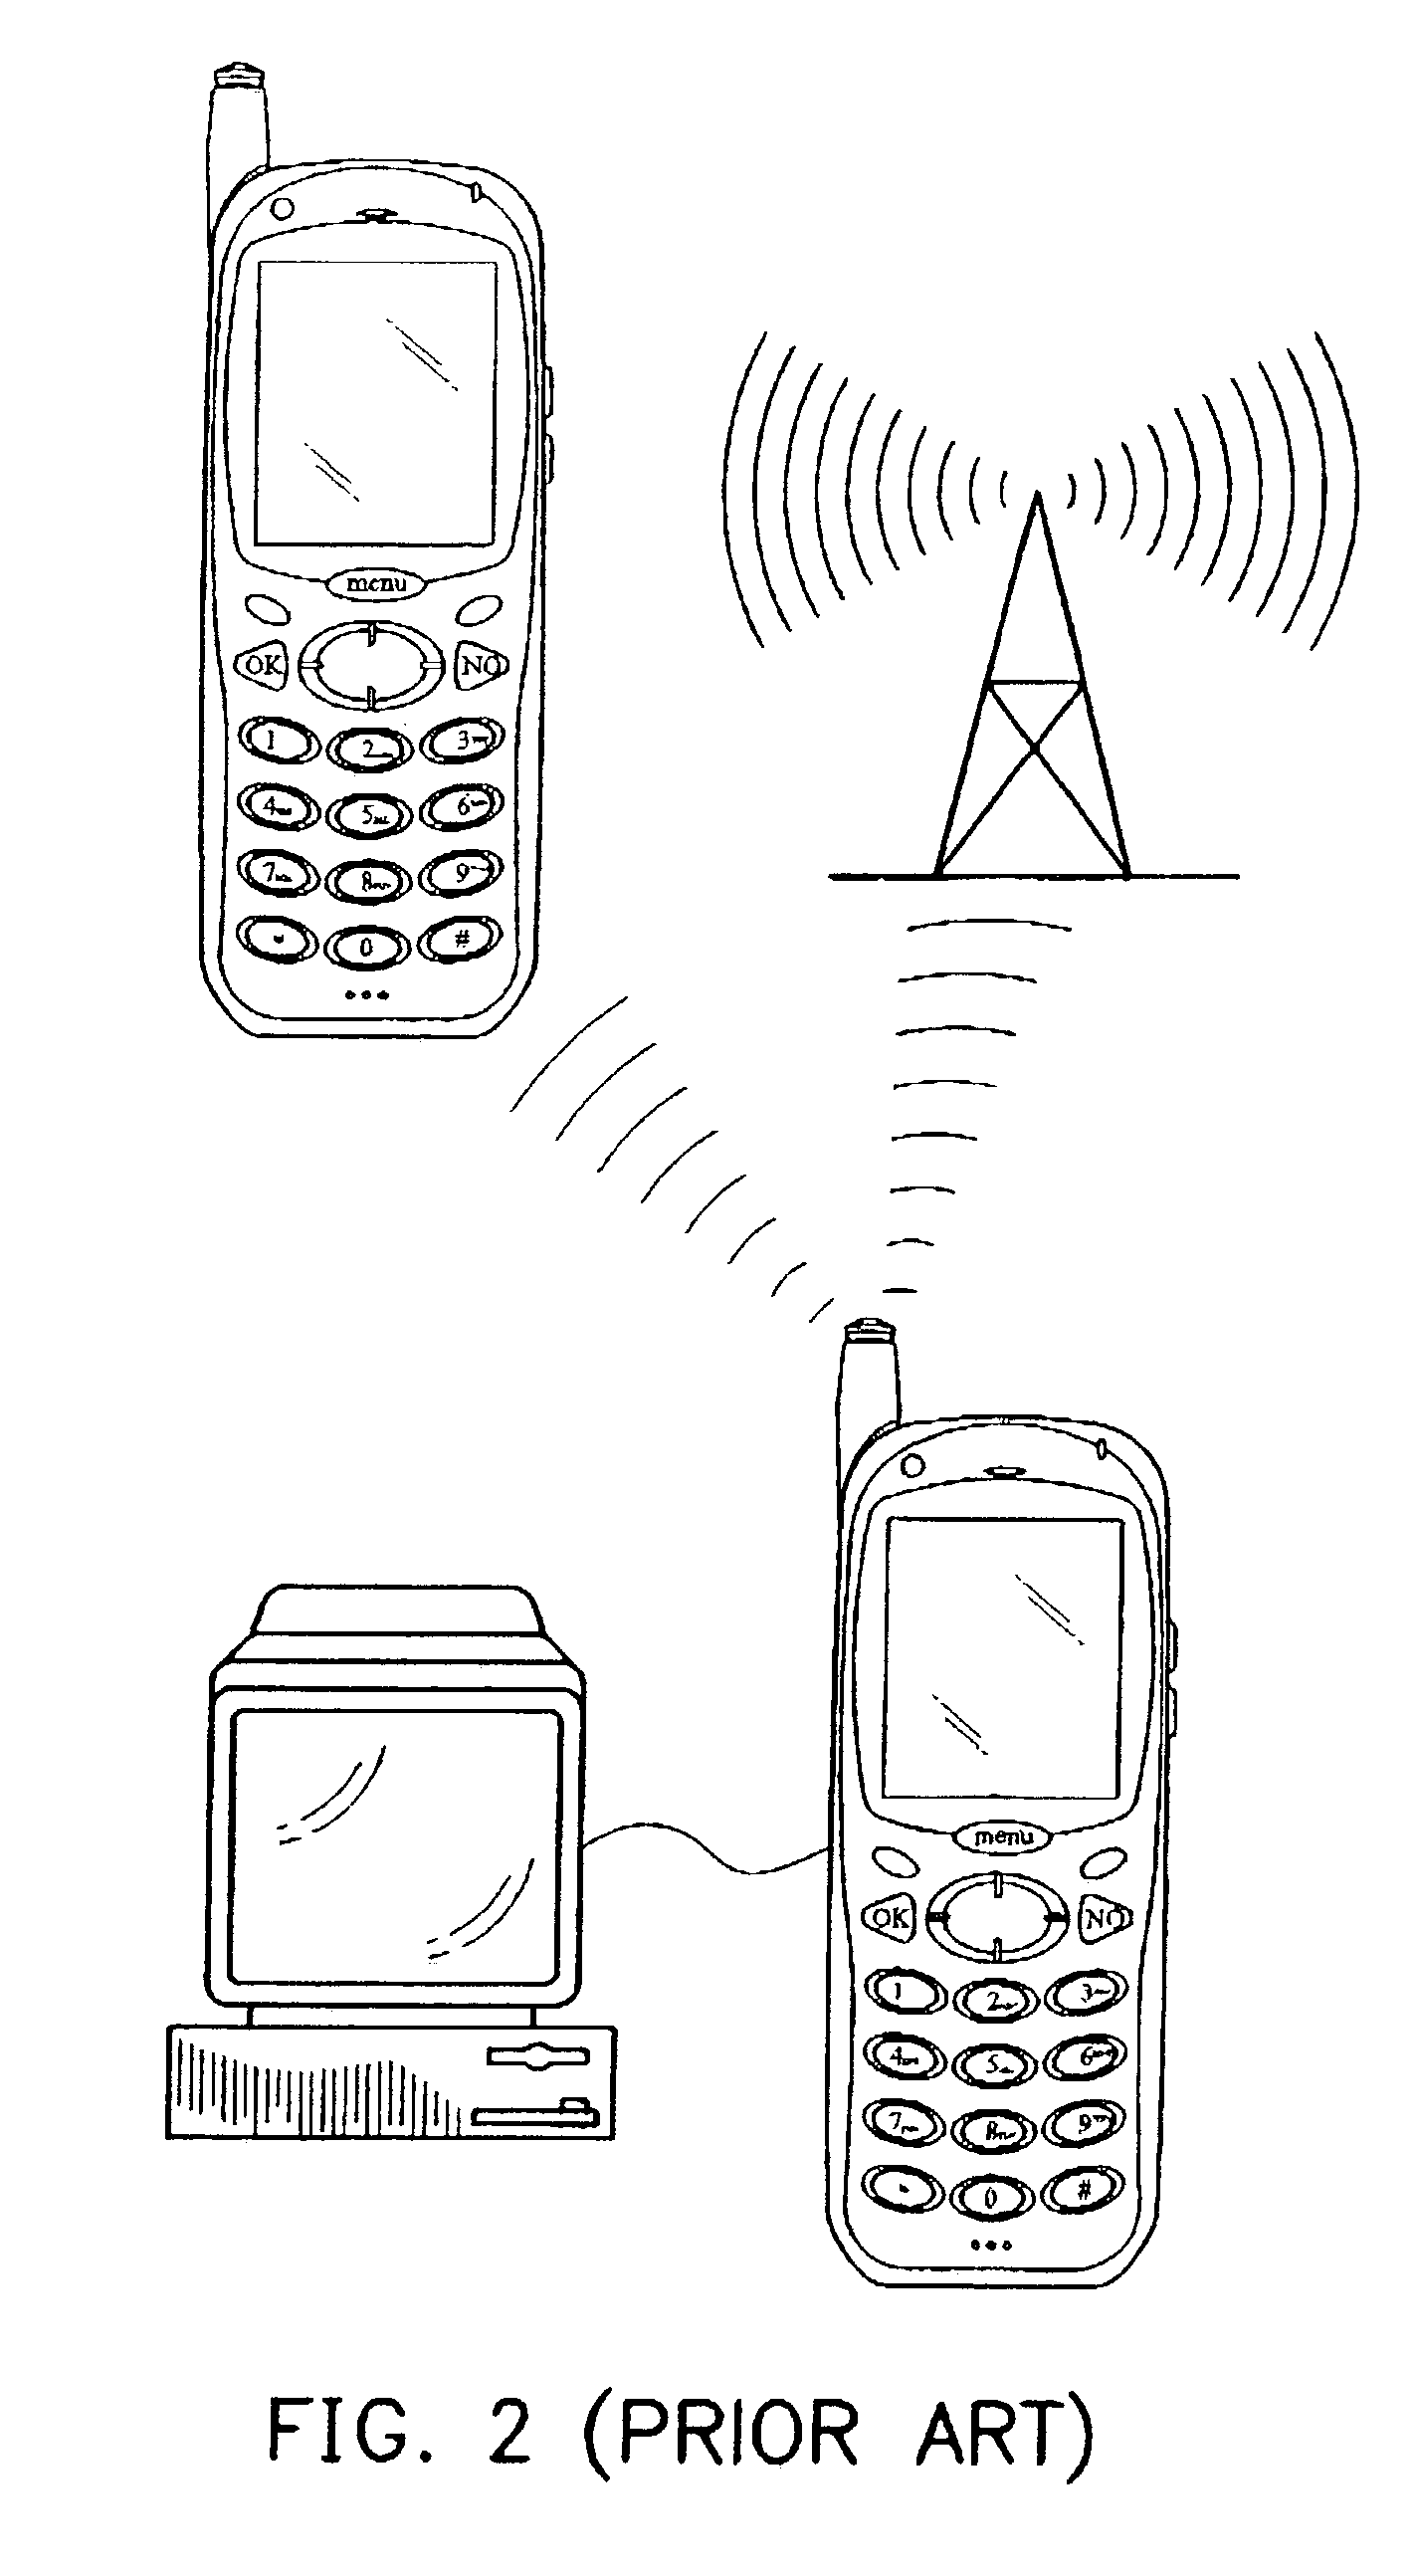 Method of enabling MIDI functions in a portable device